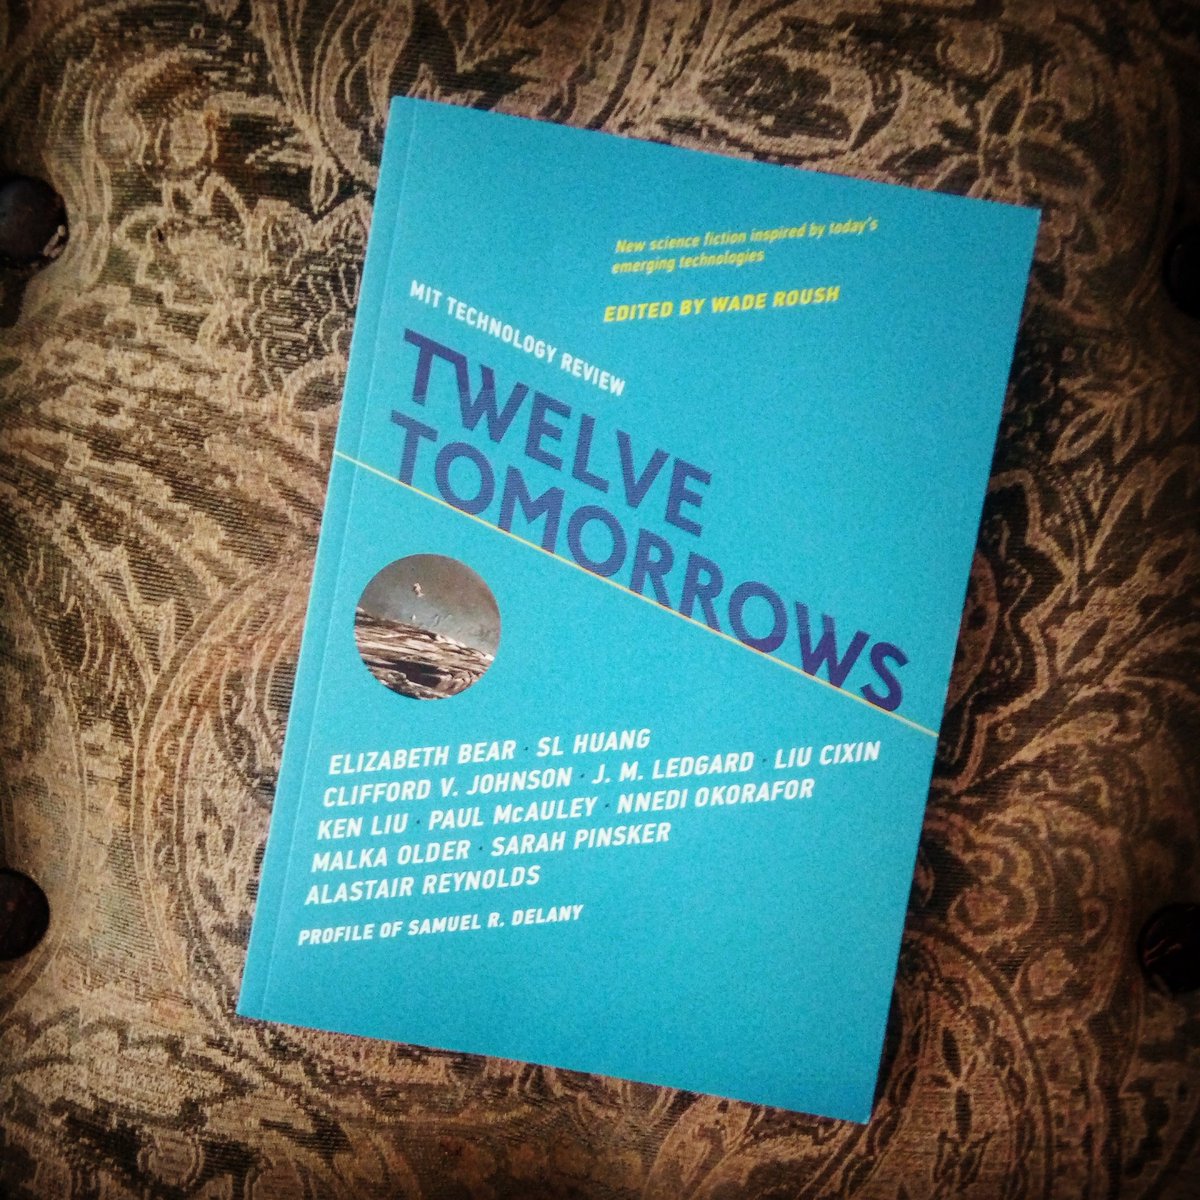 Occasionally you feel like you're holding something special. The stories in Twelve Tomorrows edited by @wroush were inspiring, thought provoking and shockingly moving. Thank you #JMLedgard @liu_cixin @kyliu99 @Nnedi #AlastairReynolds @asymptotia